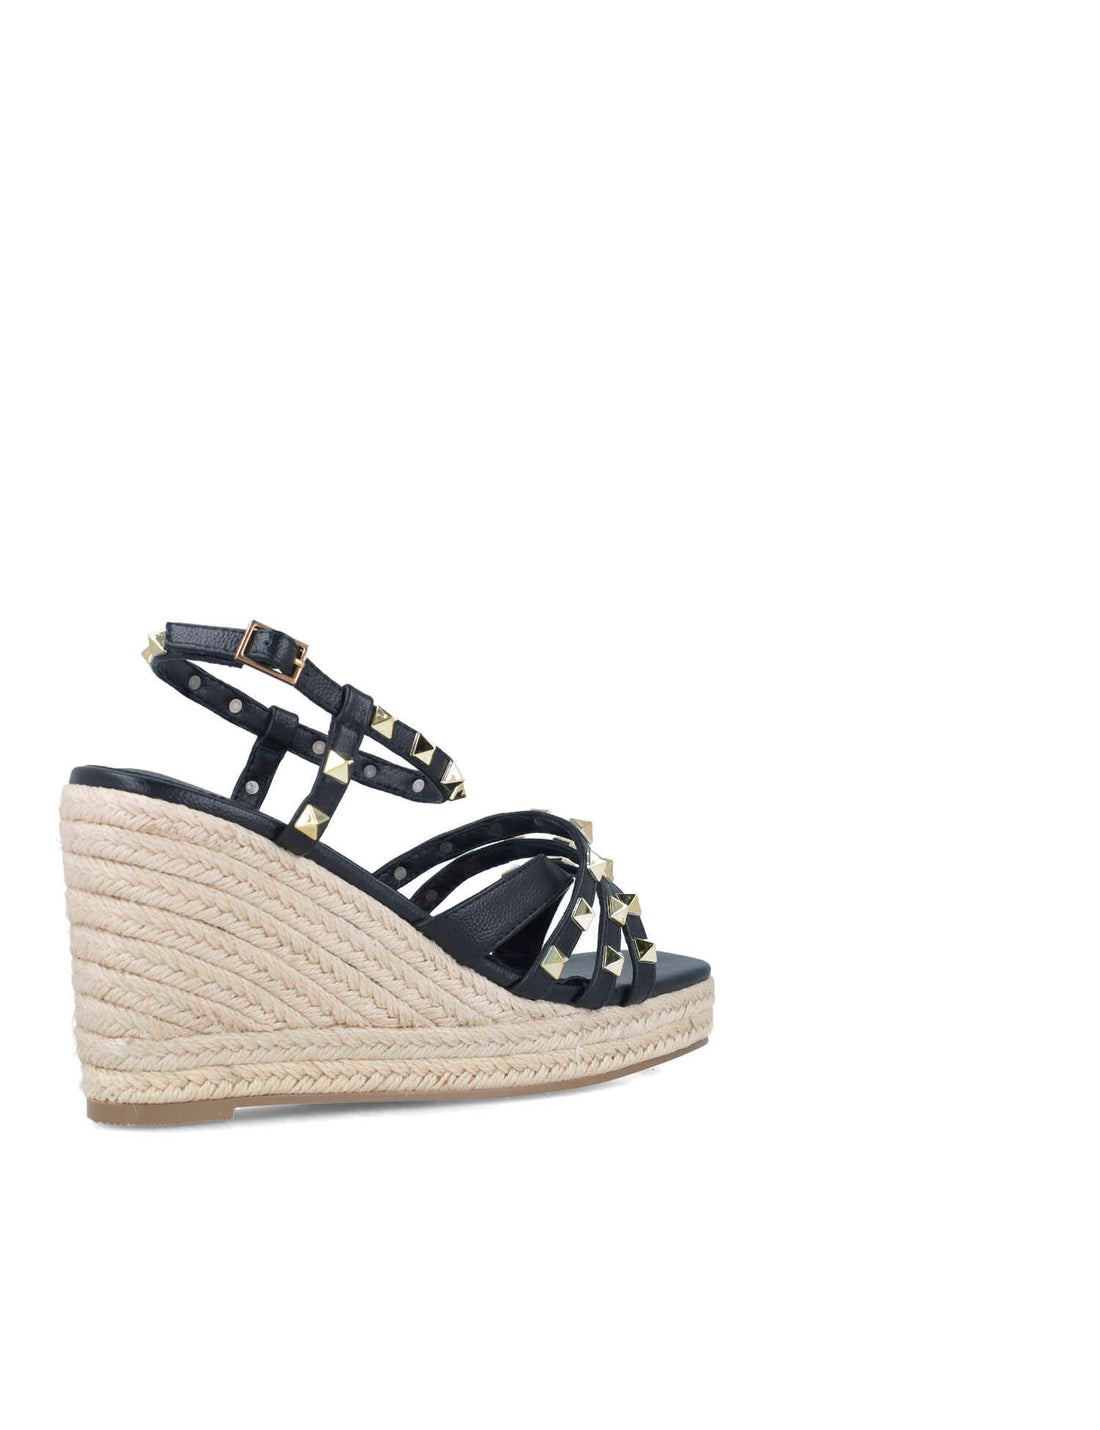 Studded Wedges With Braided Platform_24909_01_02